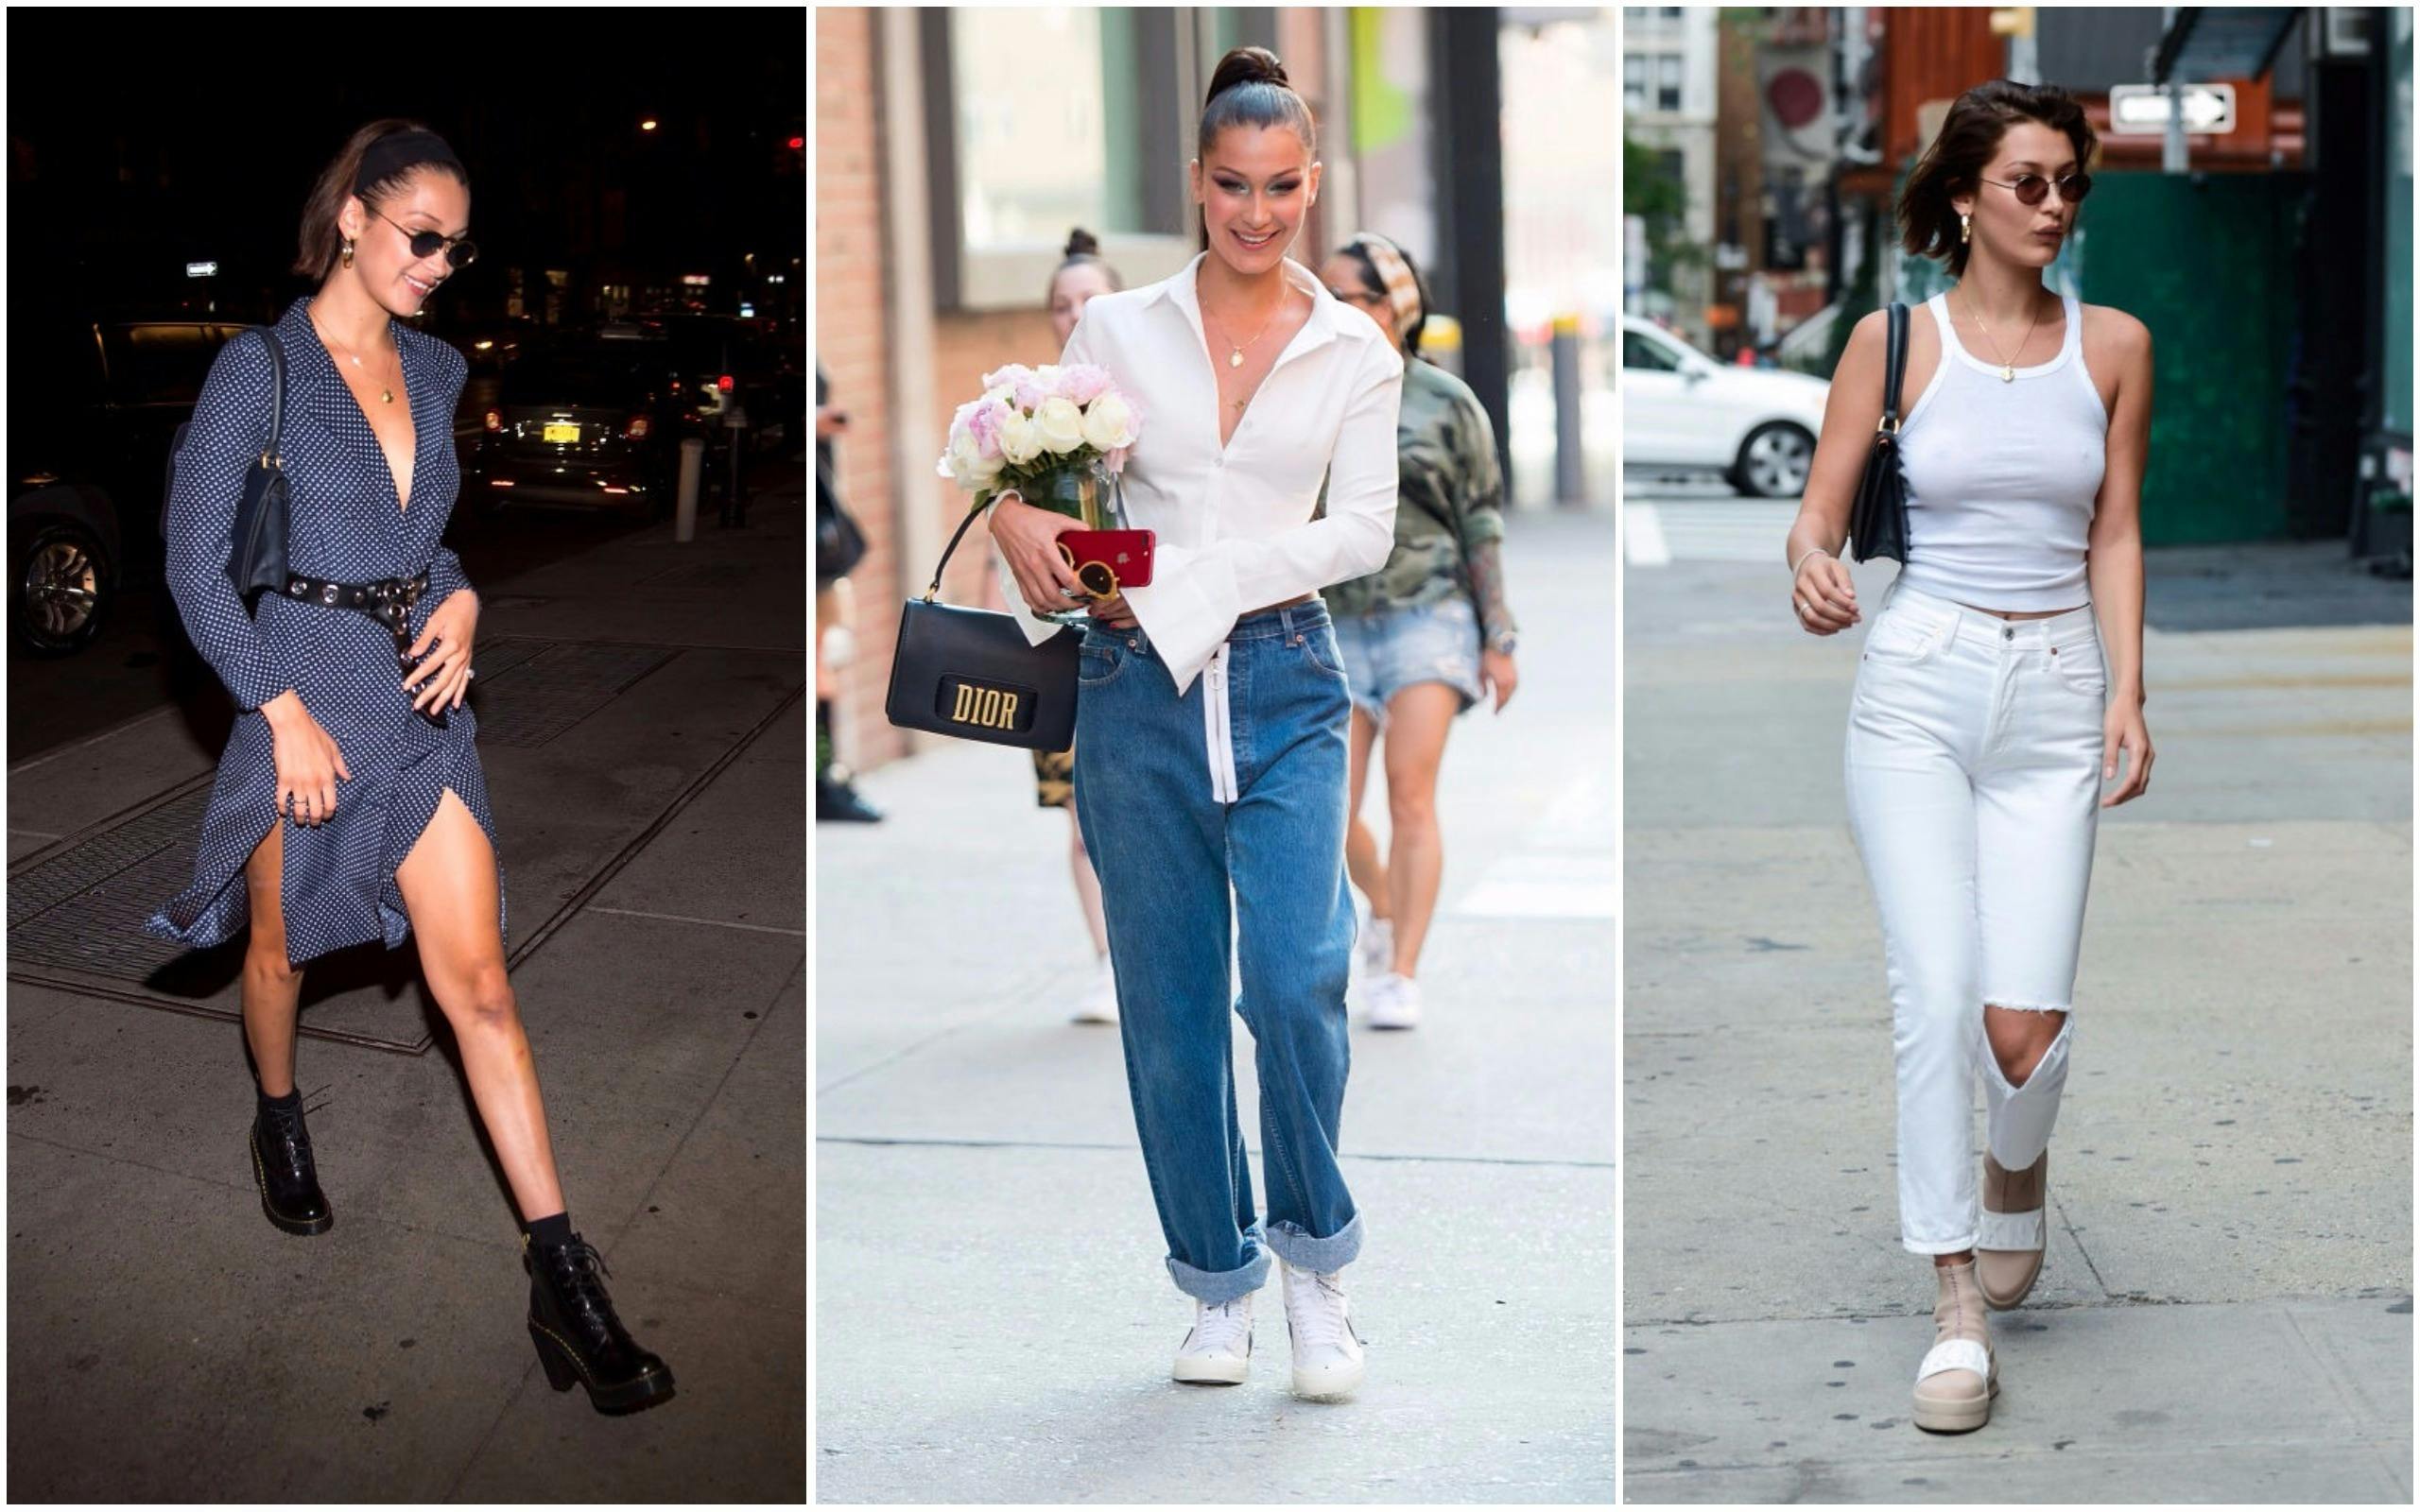 Bella Hadid: steal her style with these looks - Gabrielle Arruda